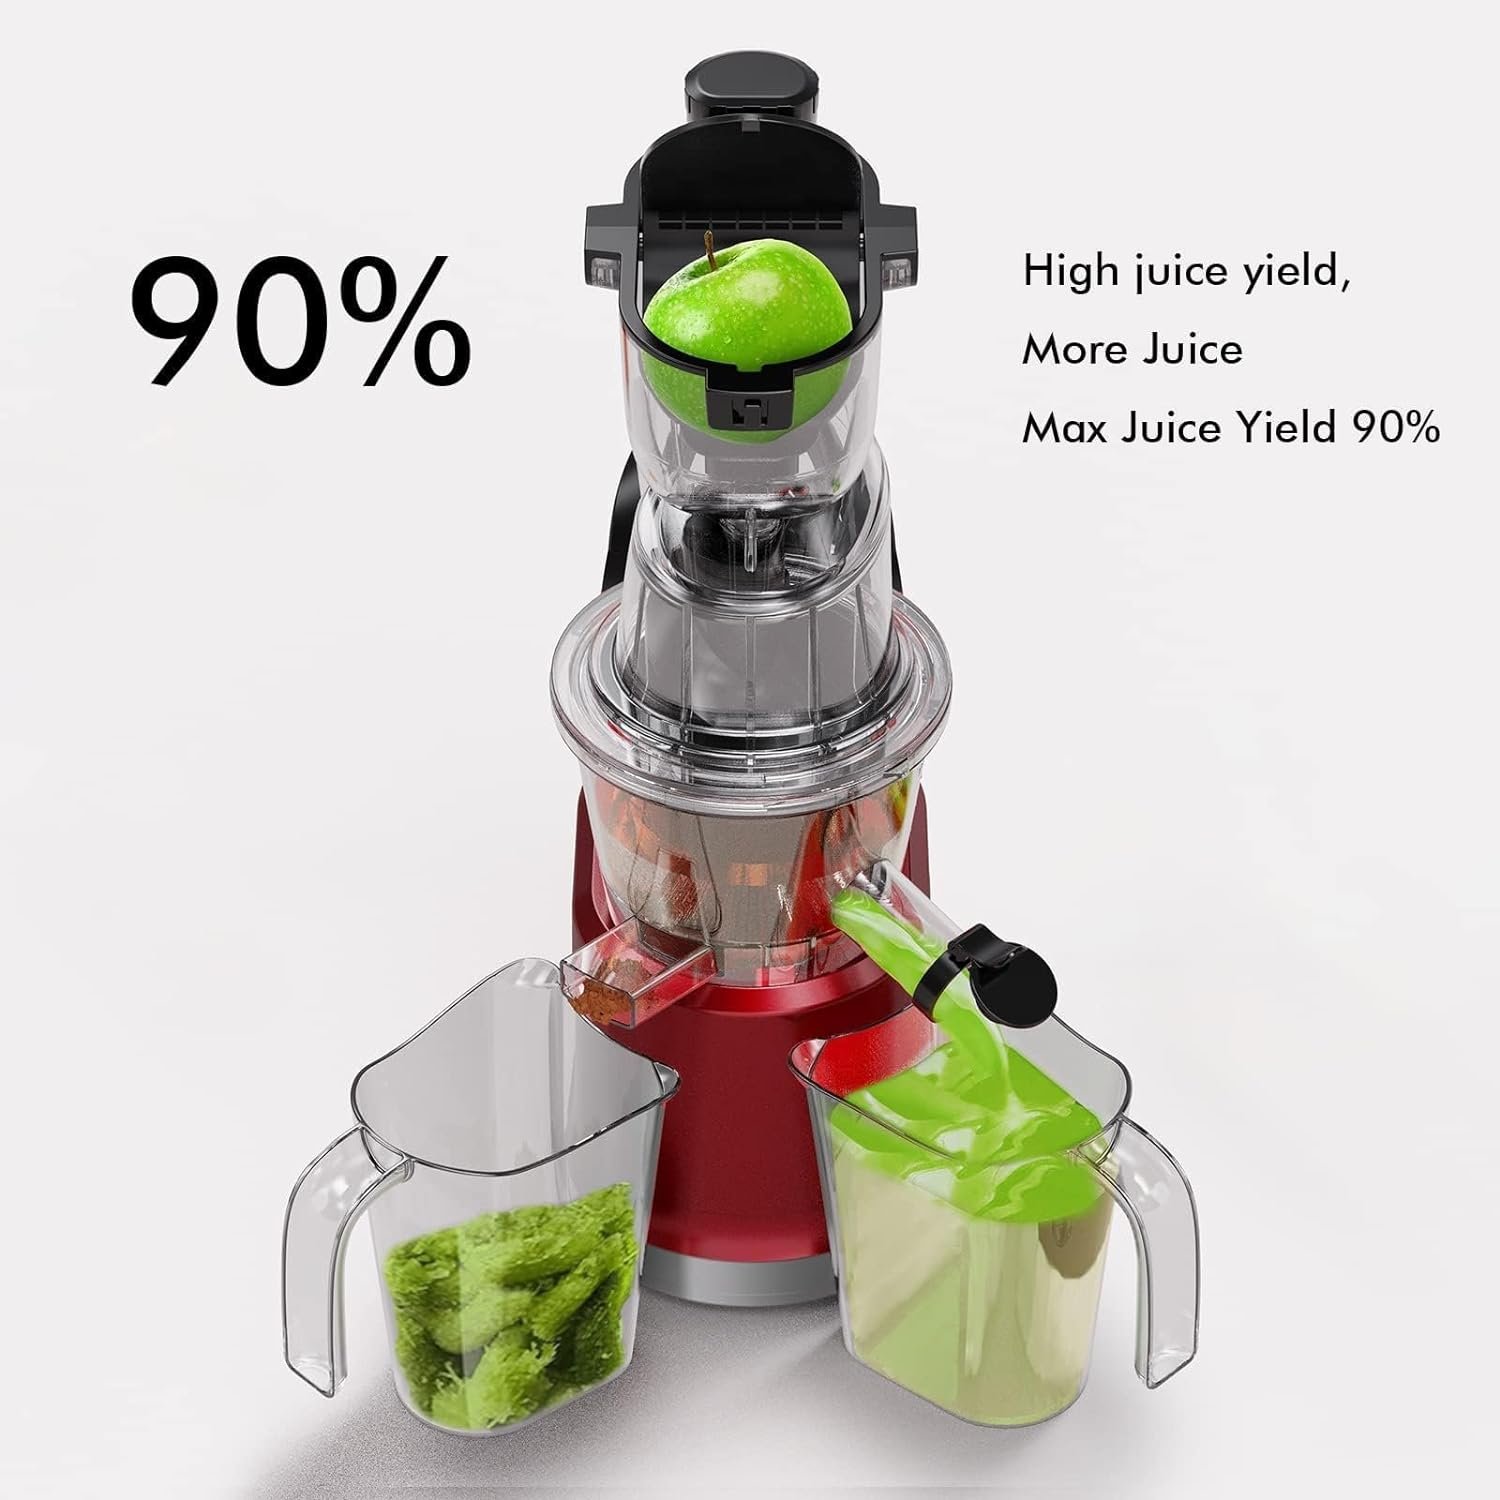 SIFENE Whole Juicer Machine, Vertical Cold Press Juicer with 3.2 Big Mouth, Easy to Clean, Extracts Juice from Whole Fruits and Vegetables - Red